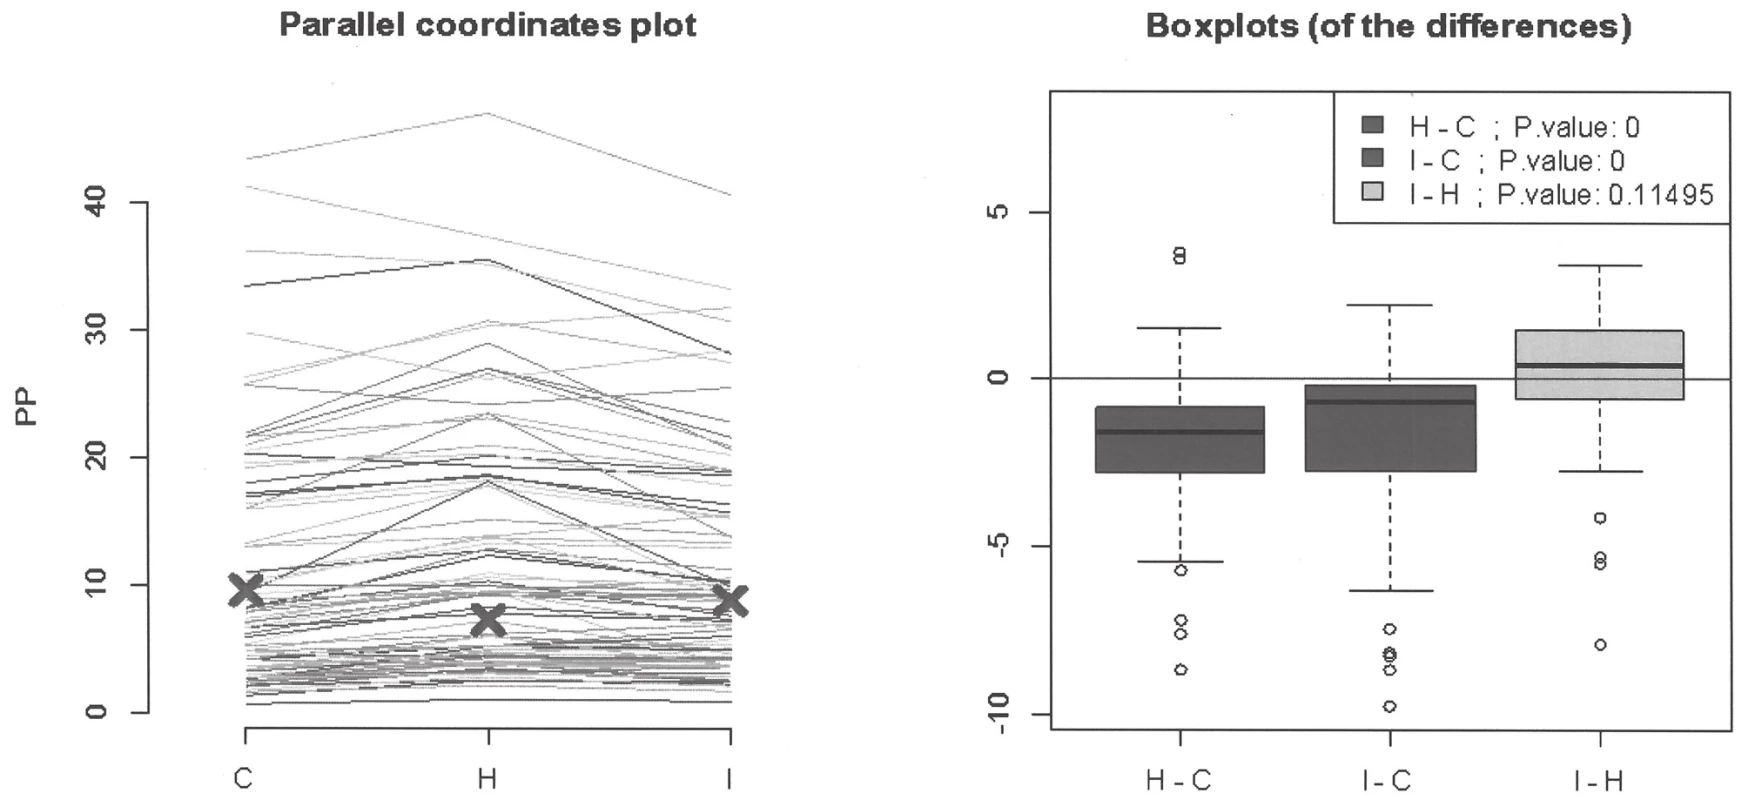 Assessment of mutual differences between analyzers on the type of paraprotein using parallel coordinates plot and
boxplots.